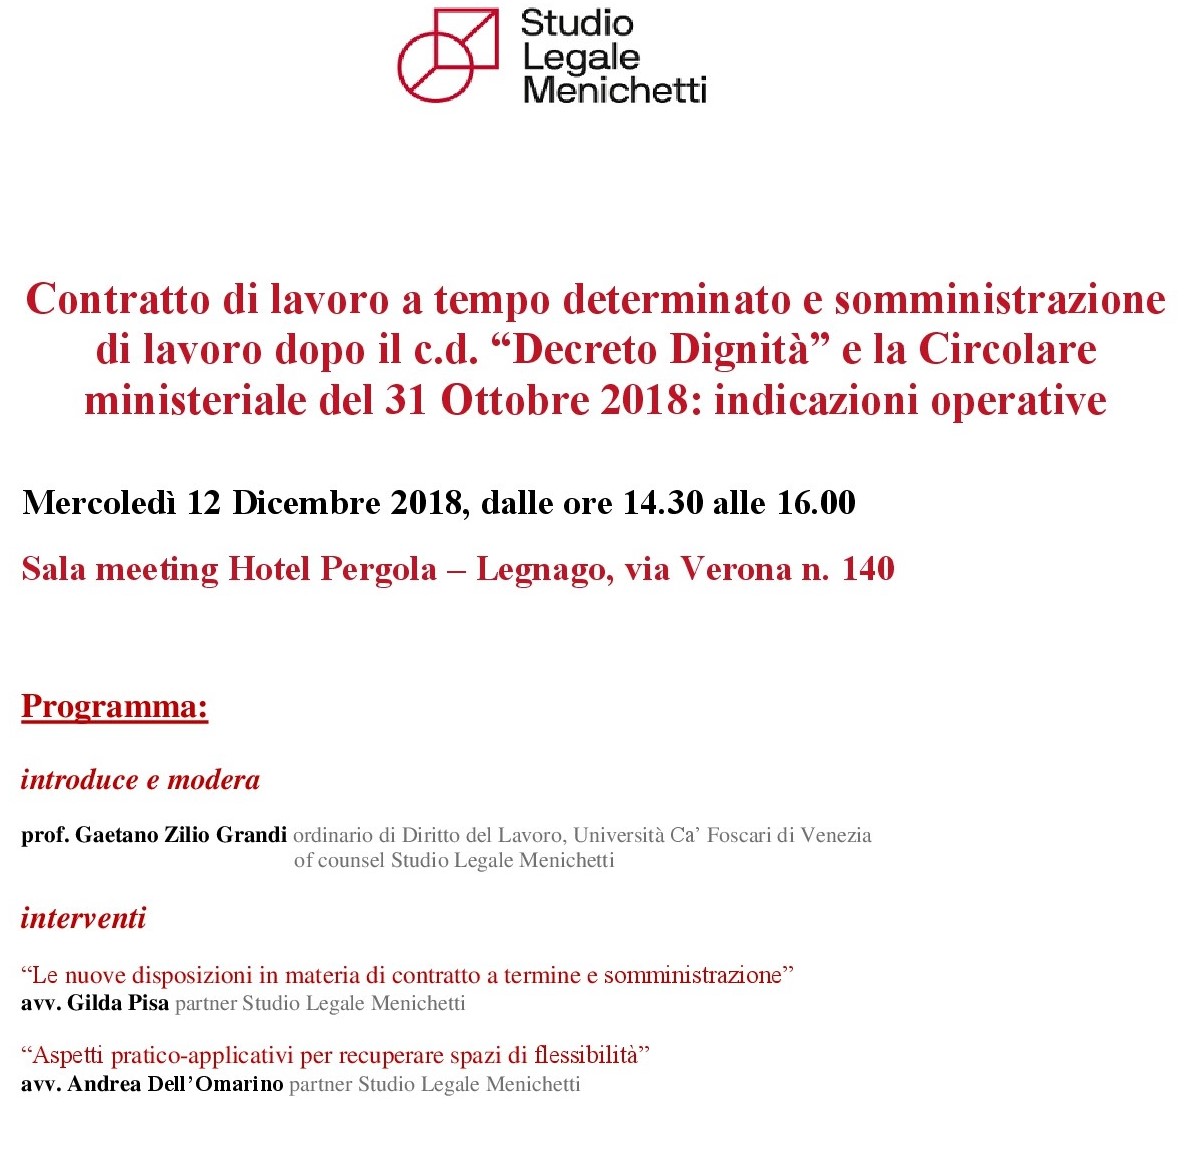 Workshop 12.12.2018: the fixed-term employment contracts and administration after the recent legislative reformsWorkshop 12.12.2018: the fixed-term employment contracts and administration after the re